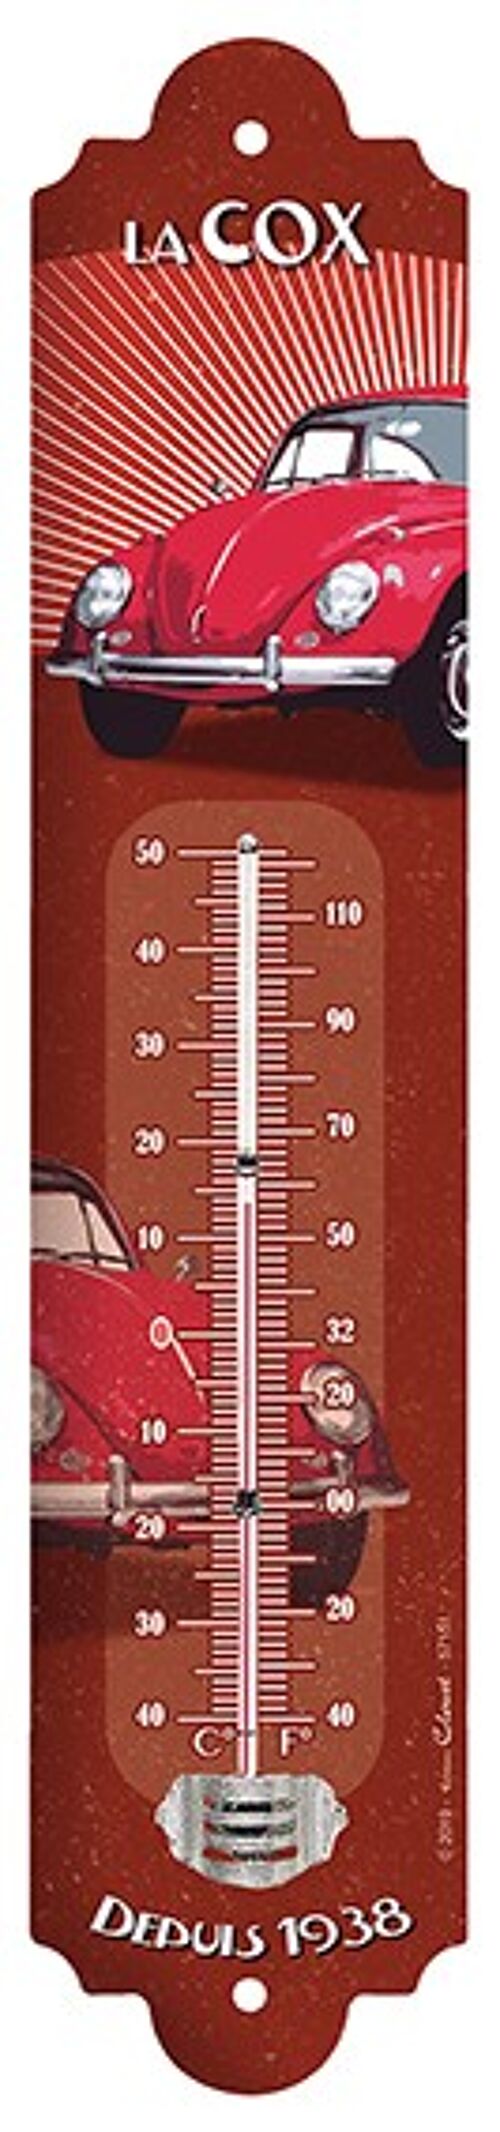 Thermomètre Vintage Wolkswagen coccinelle thermo petit modele